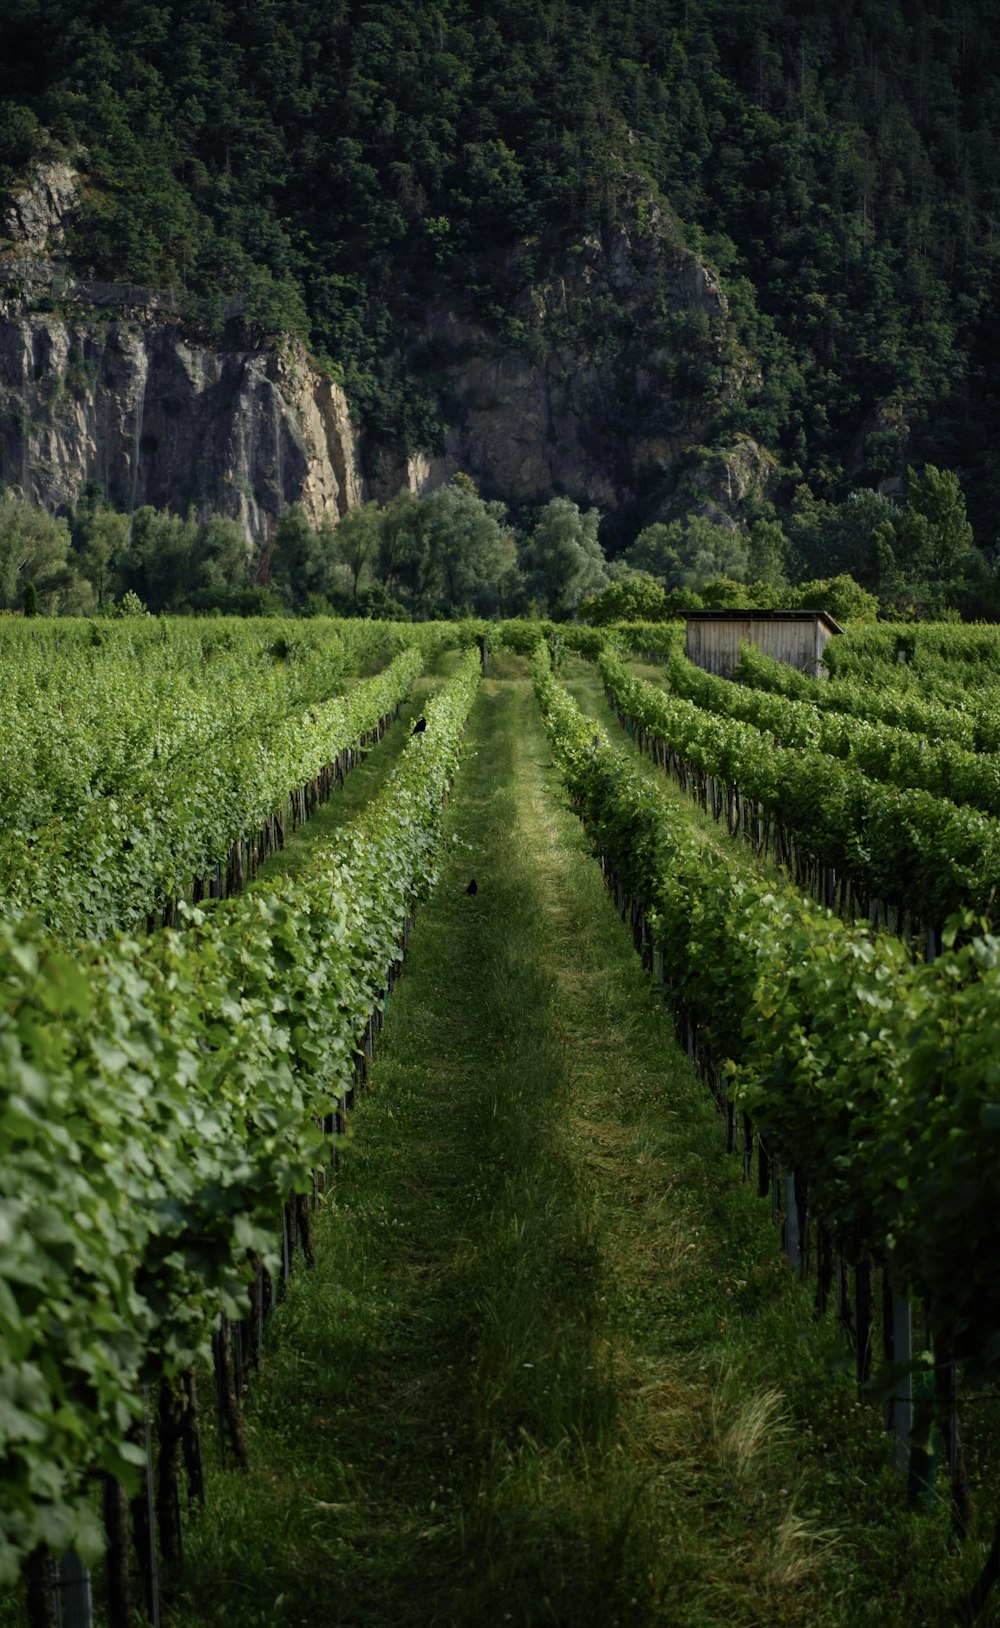 rows of green vines